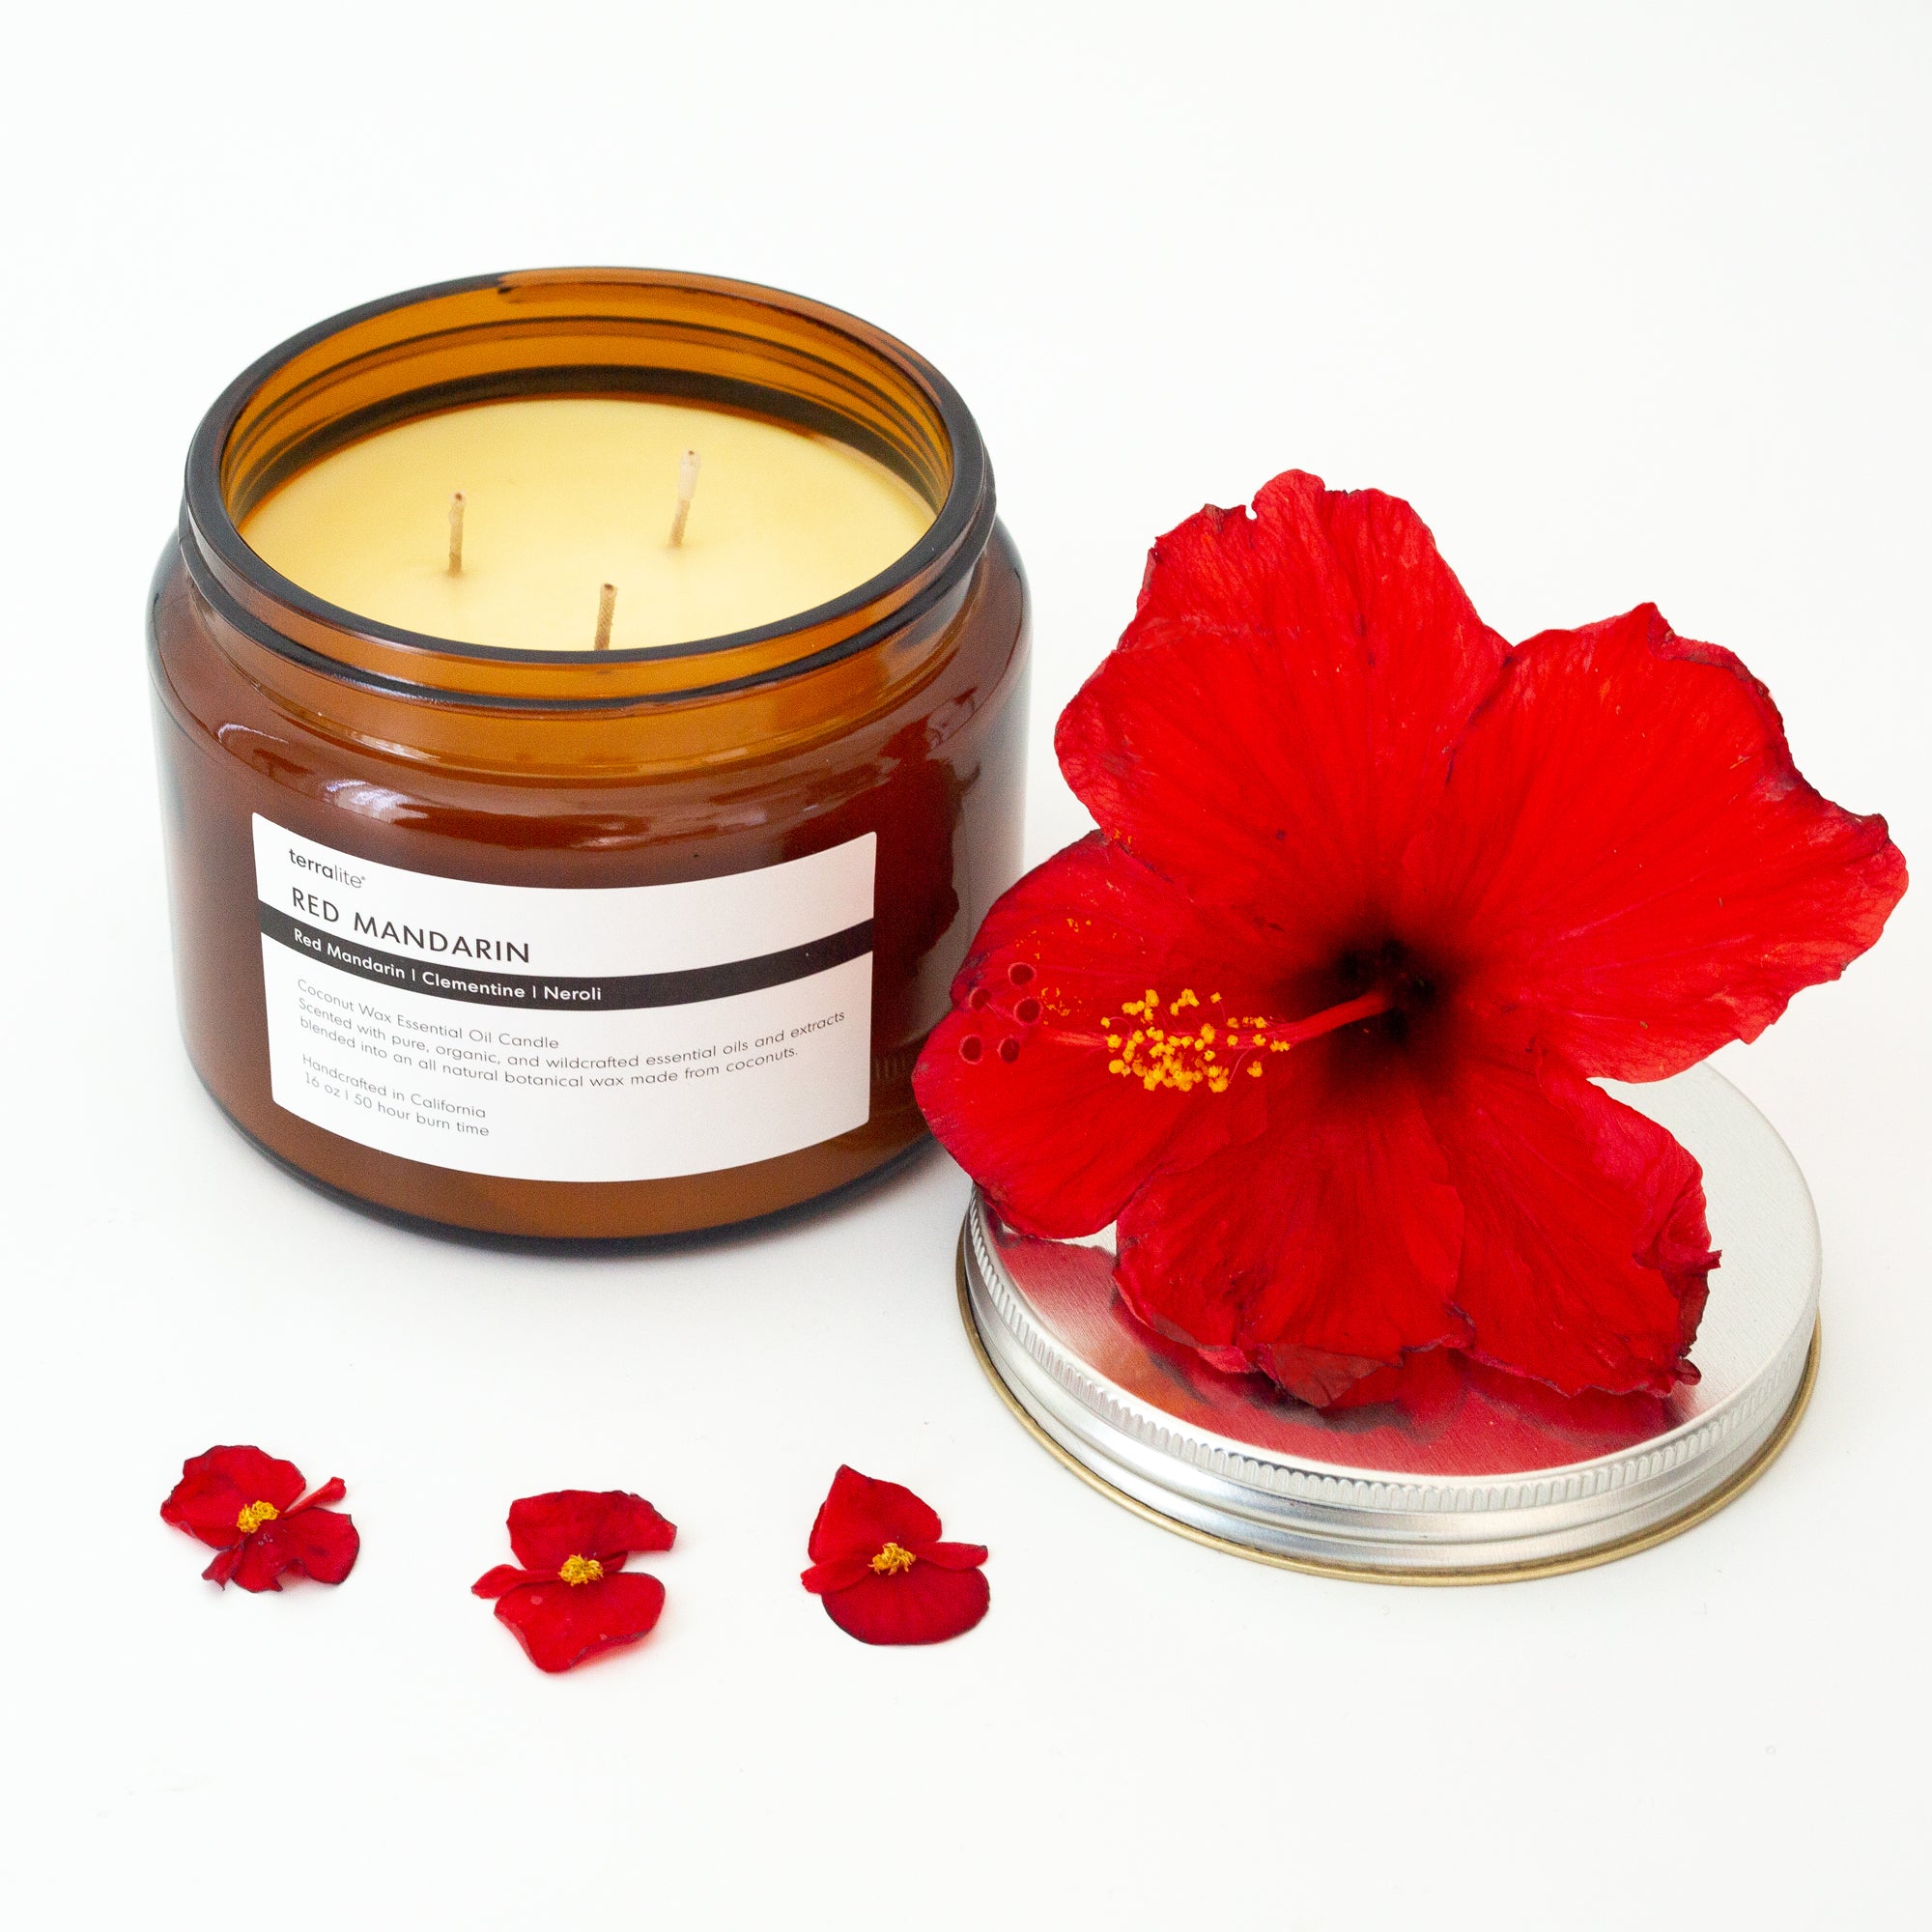 Red Mandarin Essential Oil Candle - 16 oz. made with red mandarin, clementine, and neroli essential oils.